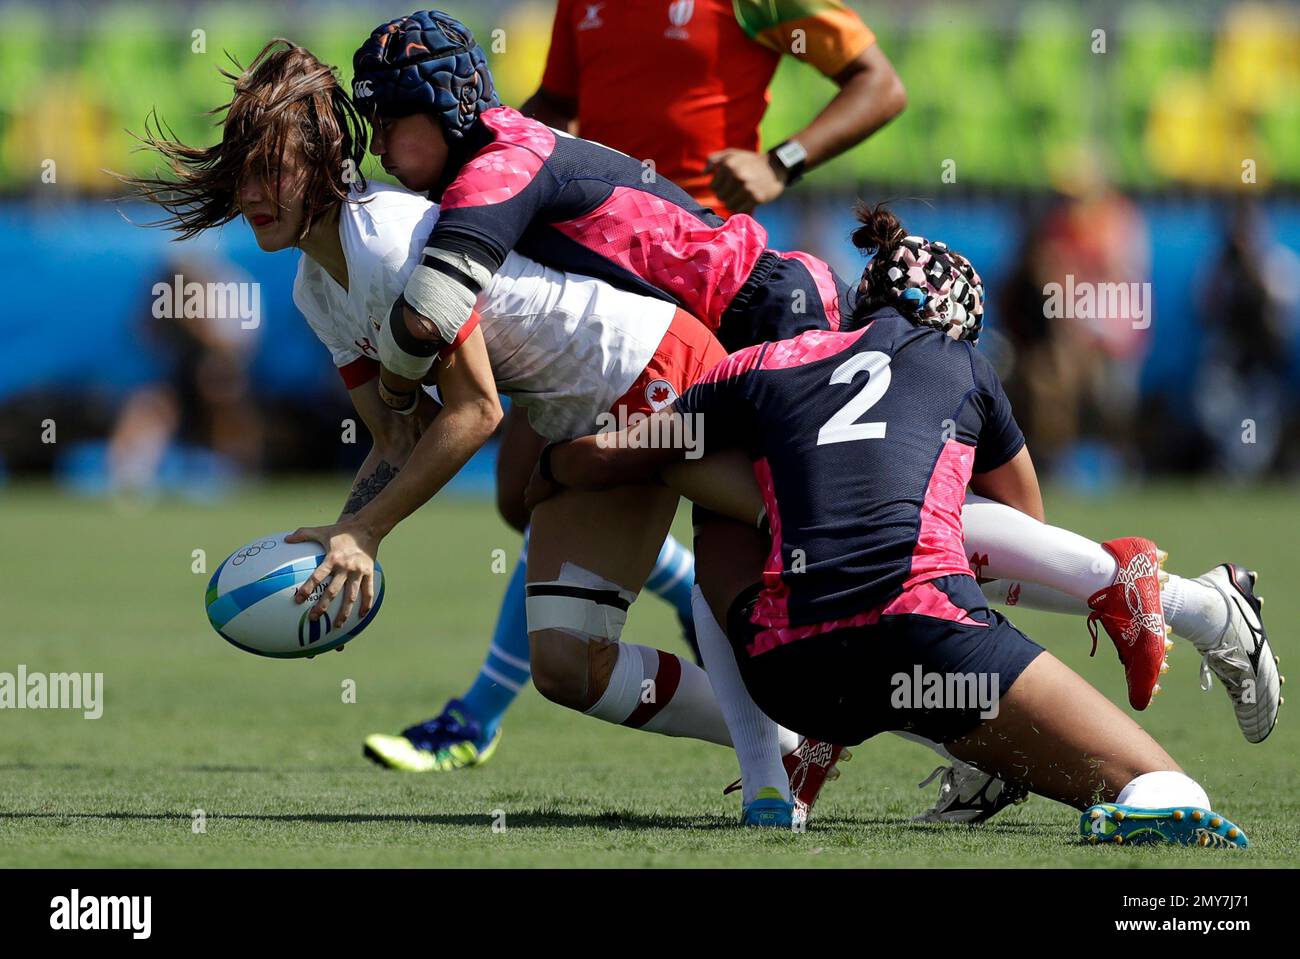 Canadas Natasha Watcham-Roy, left, is tackled by Japans Makiko Tomita, right, and teammate during the womens rugby sevens match between USA and Fiji at the Summer Olympics in Rio de Janeiro, Brazil,